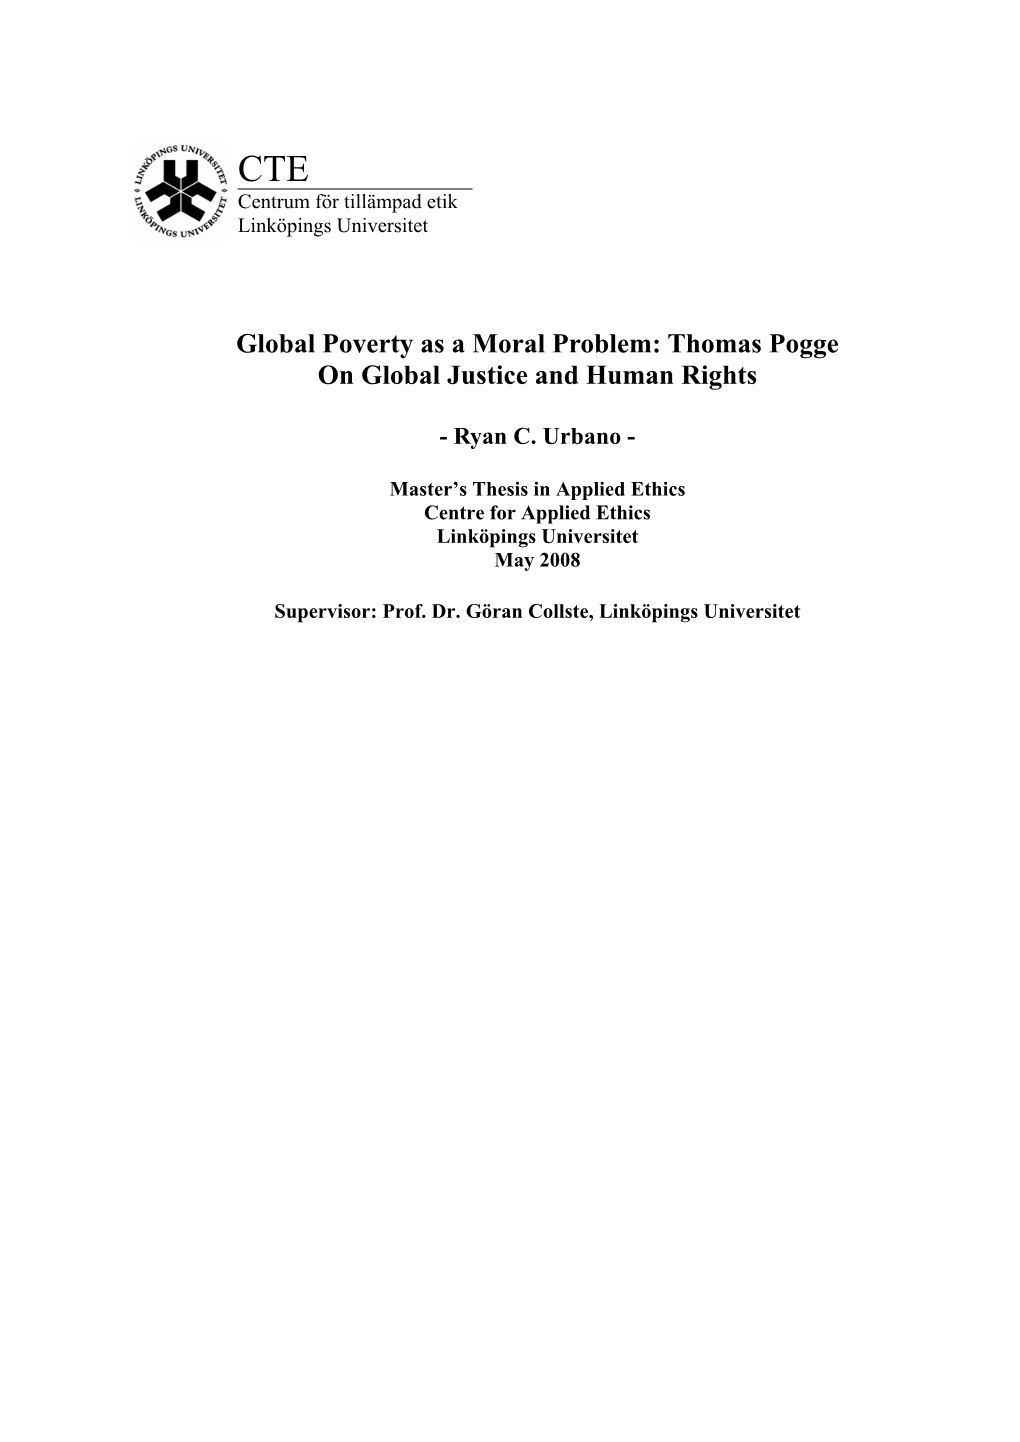 Thomas Pogge on Global Justice and Human Rights